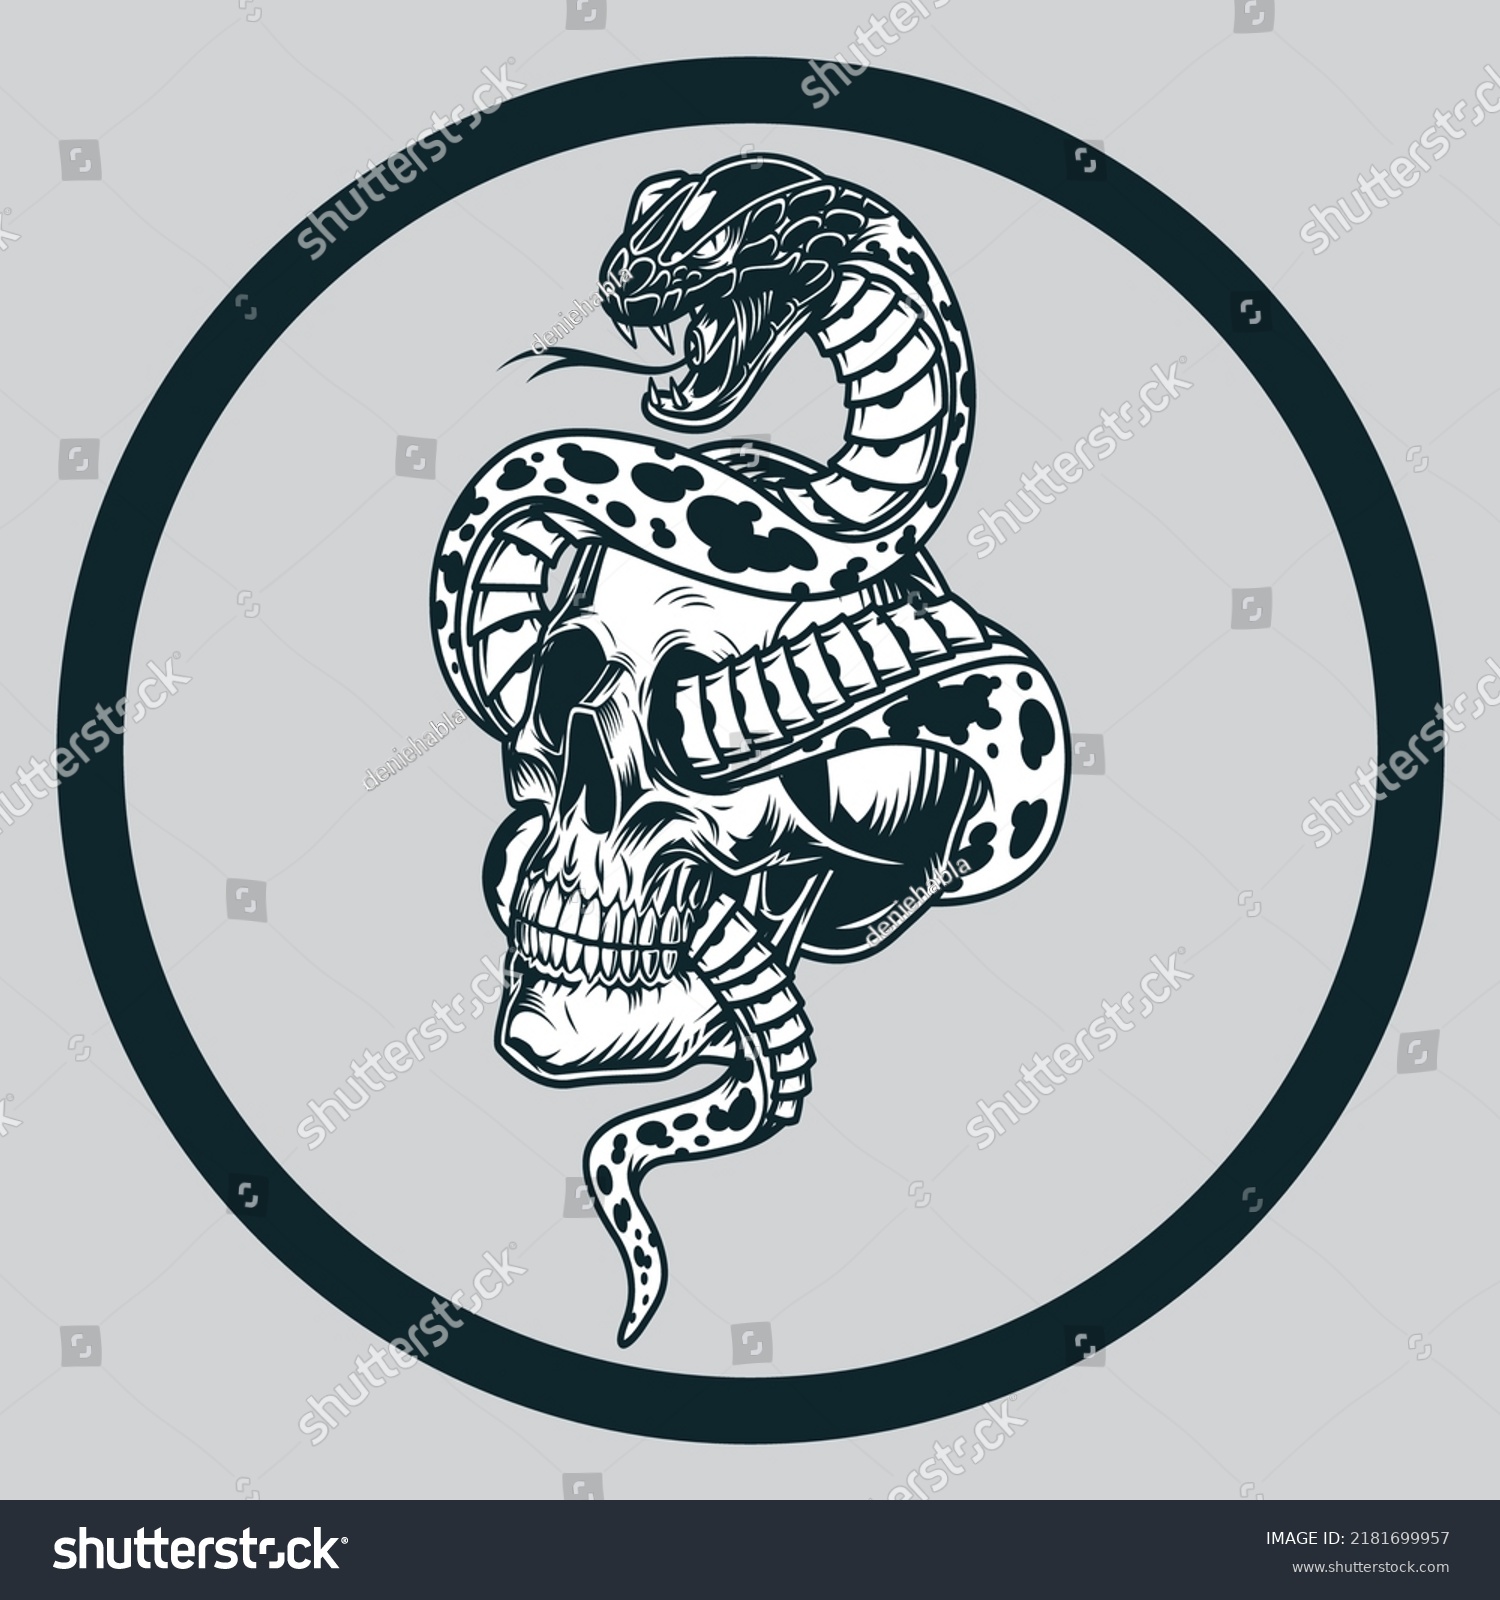 SVG of Snake head icon or logo in a circle for company, community, tattoo, and more svg